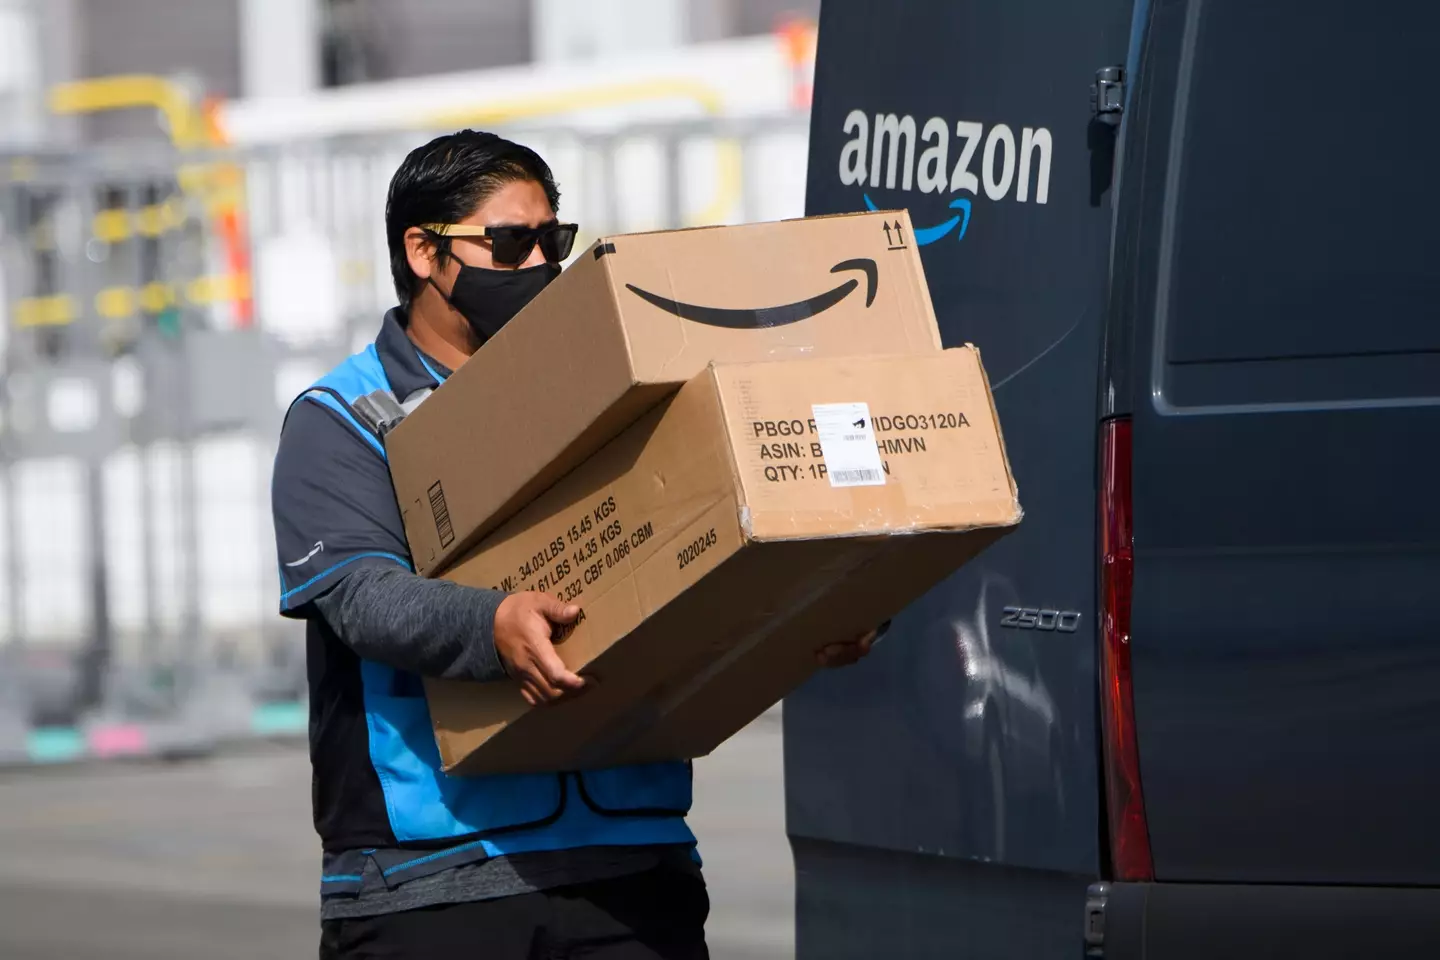 Some Amazon drivers are debating jumping ship.